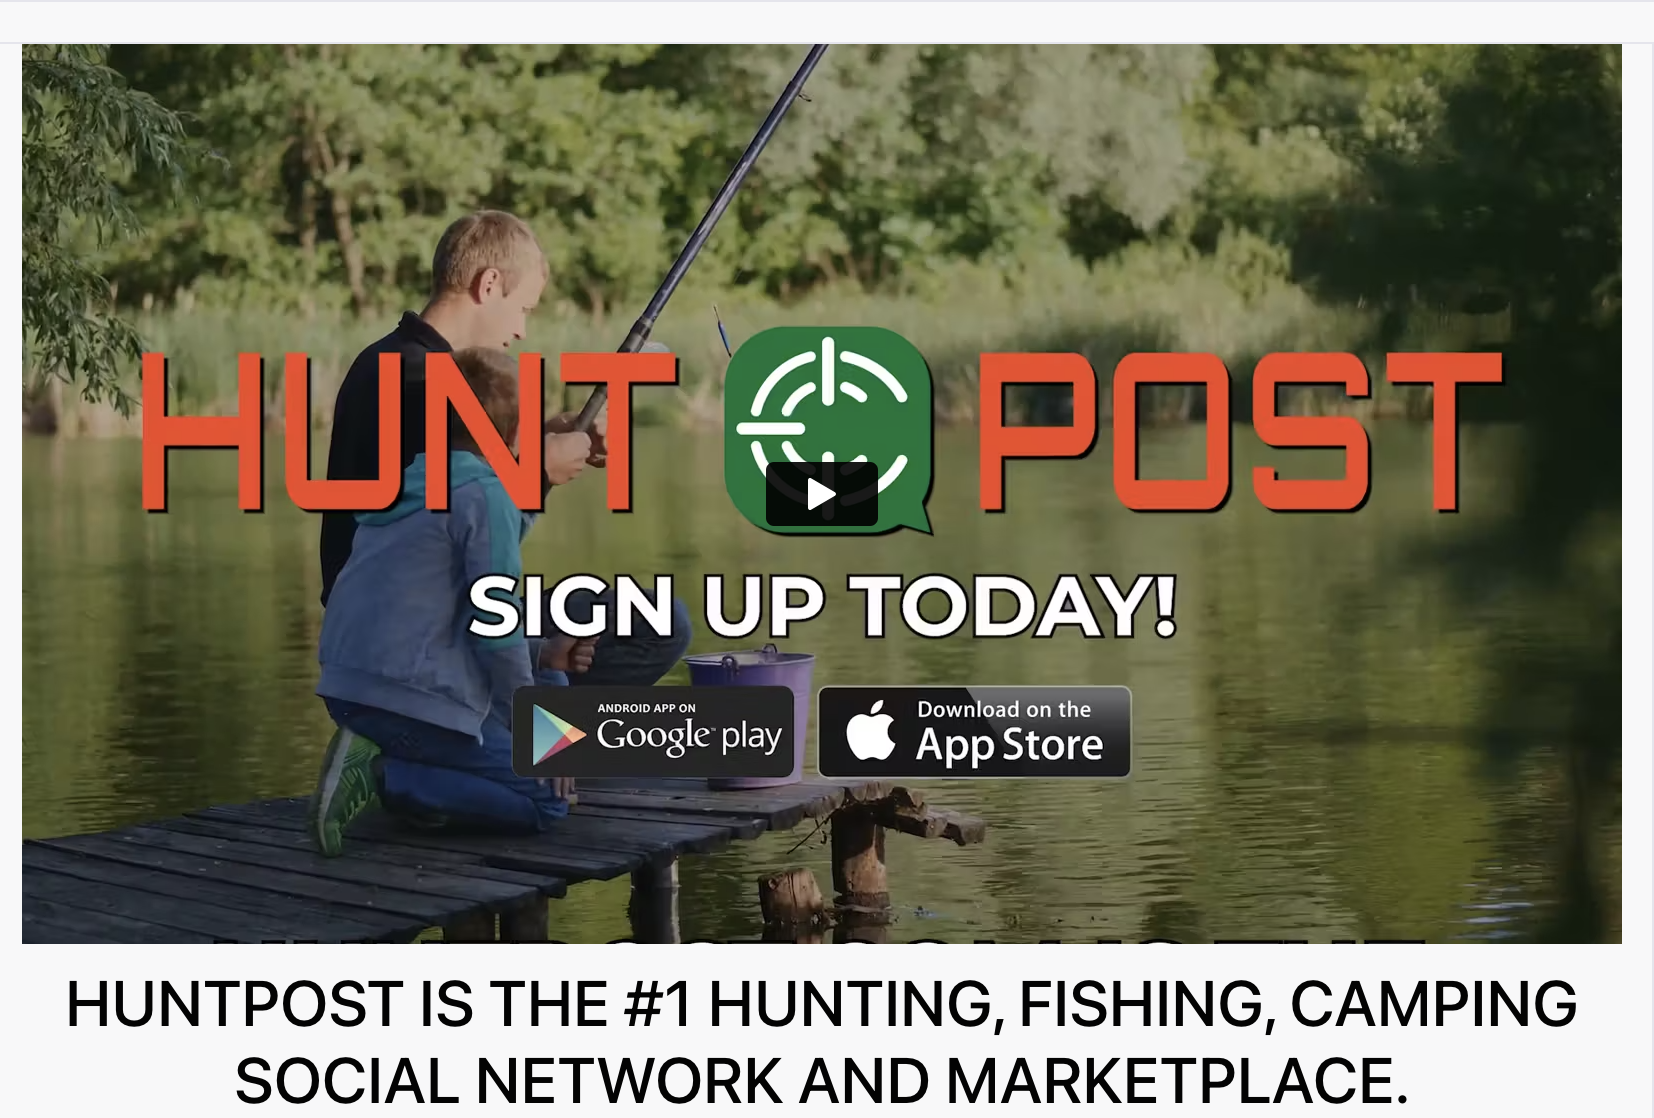 Huntpost: The Social Network for Hunting, Fishing, and Camping Enthusiasts